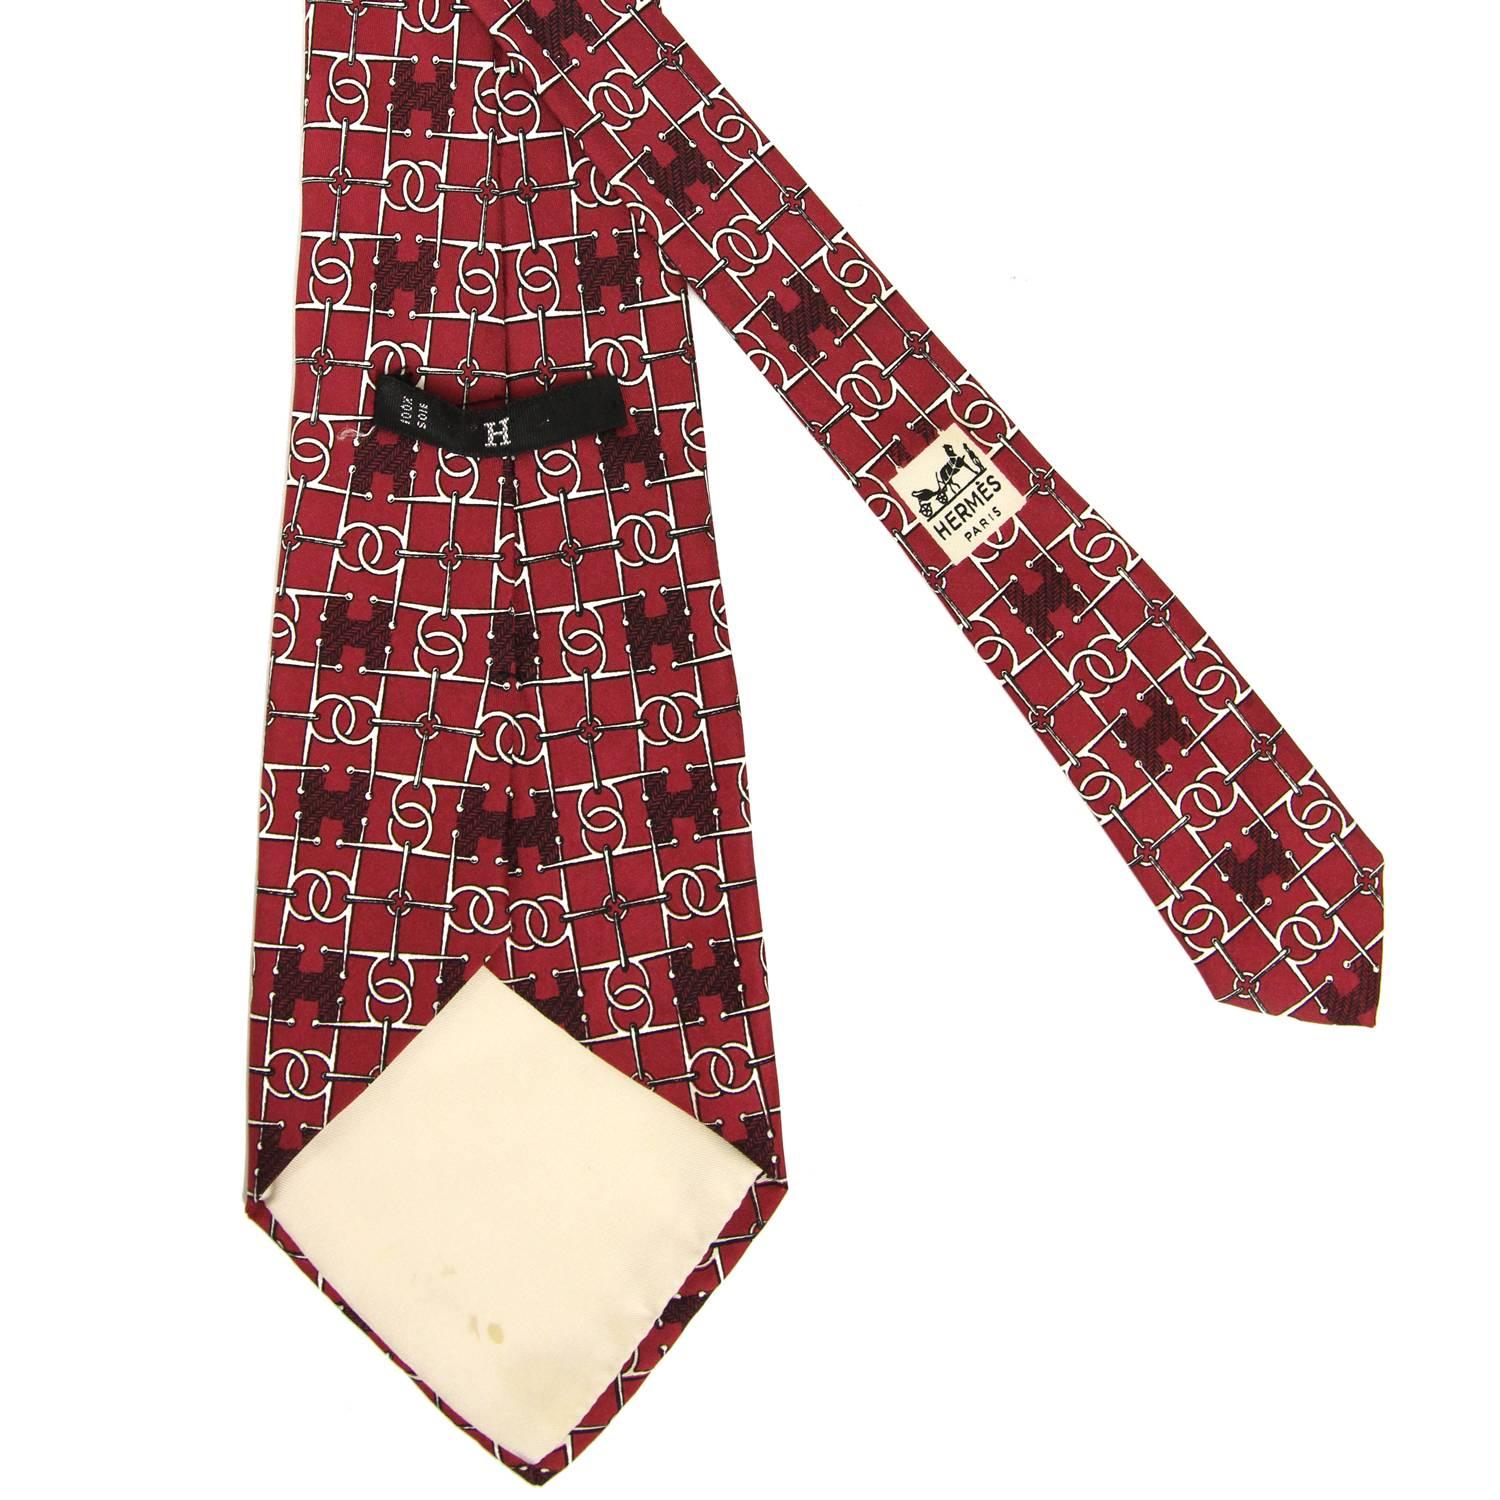 A.N.G.E.L.O. Vintage - Italy

Elegant Hermès 100% silk printed tie in bordeaux and white H all over pattern. The item is vintage, it was produced in the 1970s and is in very good conditions, it only shows a little stain on the back. Width: 10